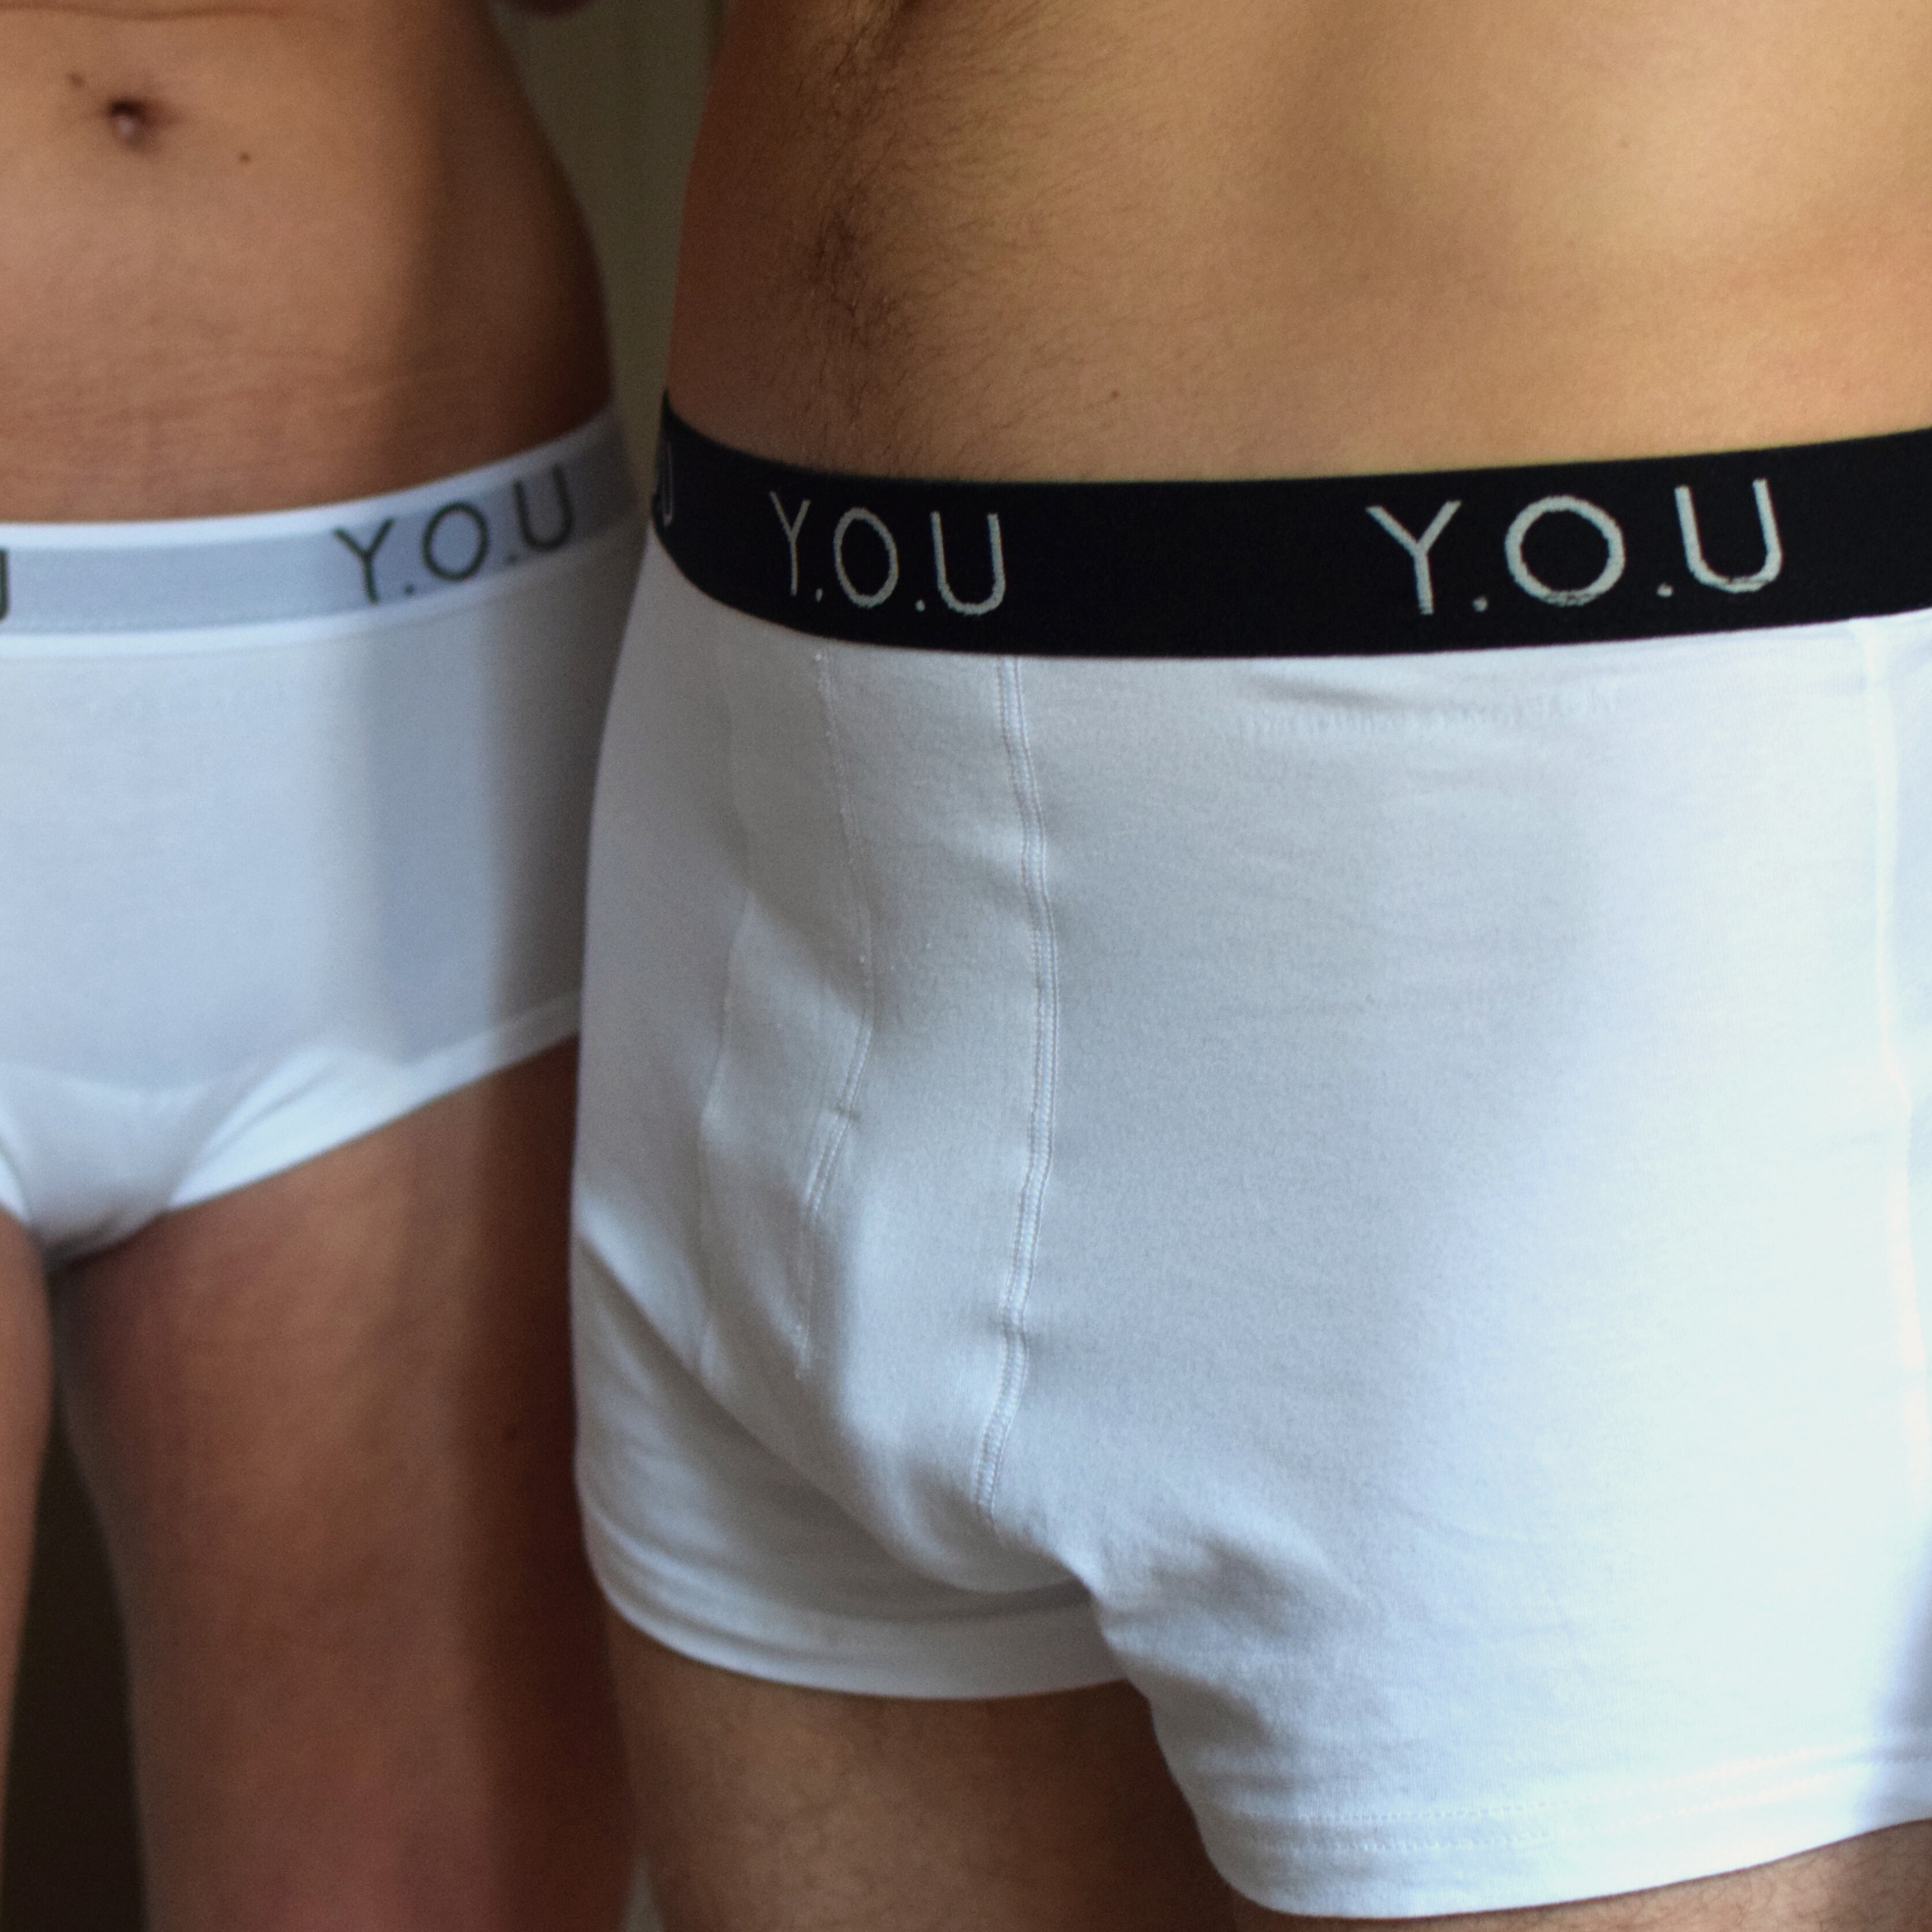 Two individuals are shown from the waist down, wearing white hipster trunks with black waistbands labeled "Y.O.U." The focus is on their midsections as they stand close together.